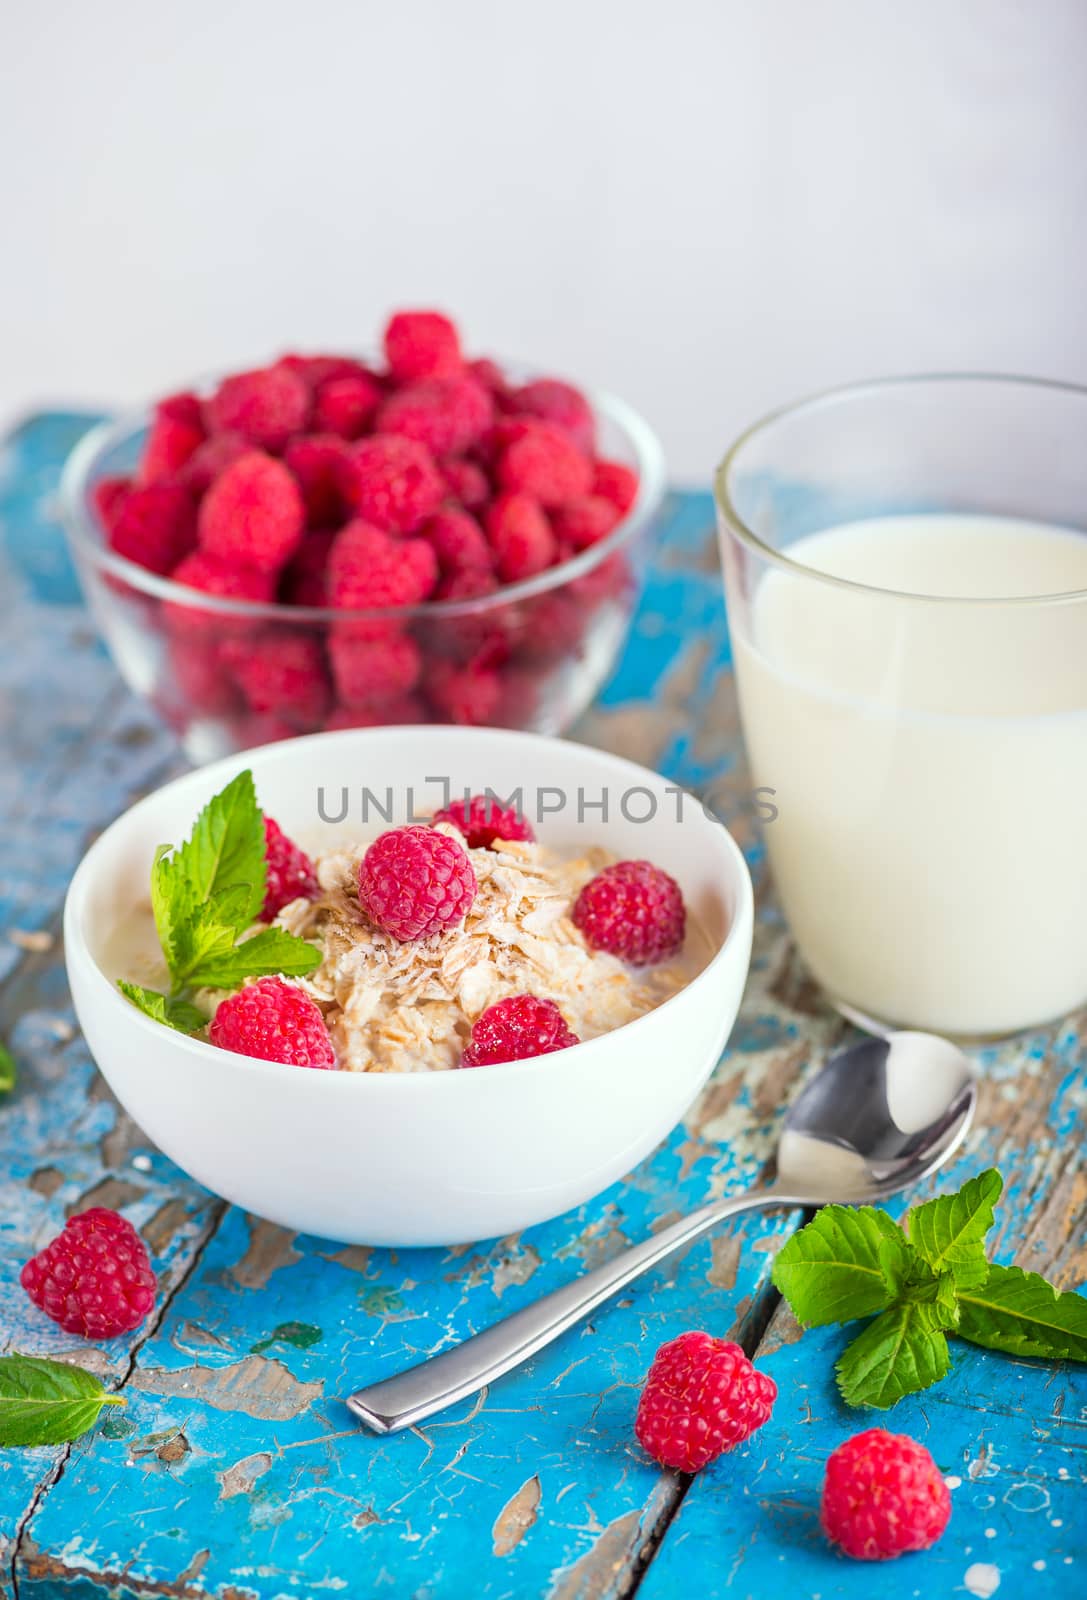 Oat flakes with milk and frash raspberries for breakfast, glass with milk, spoon, fresh mint on an old wooden blue background. The concept of a healthy diet, weight loss